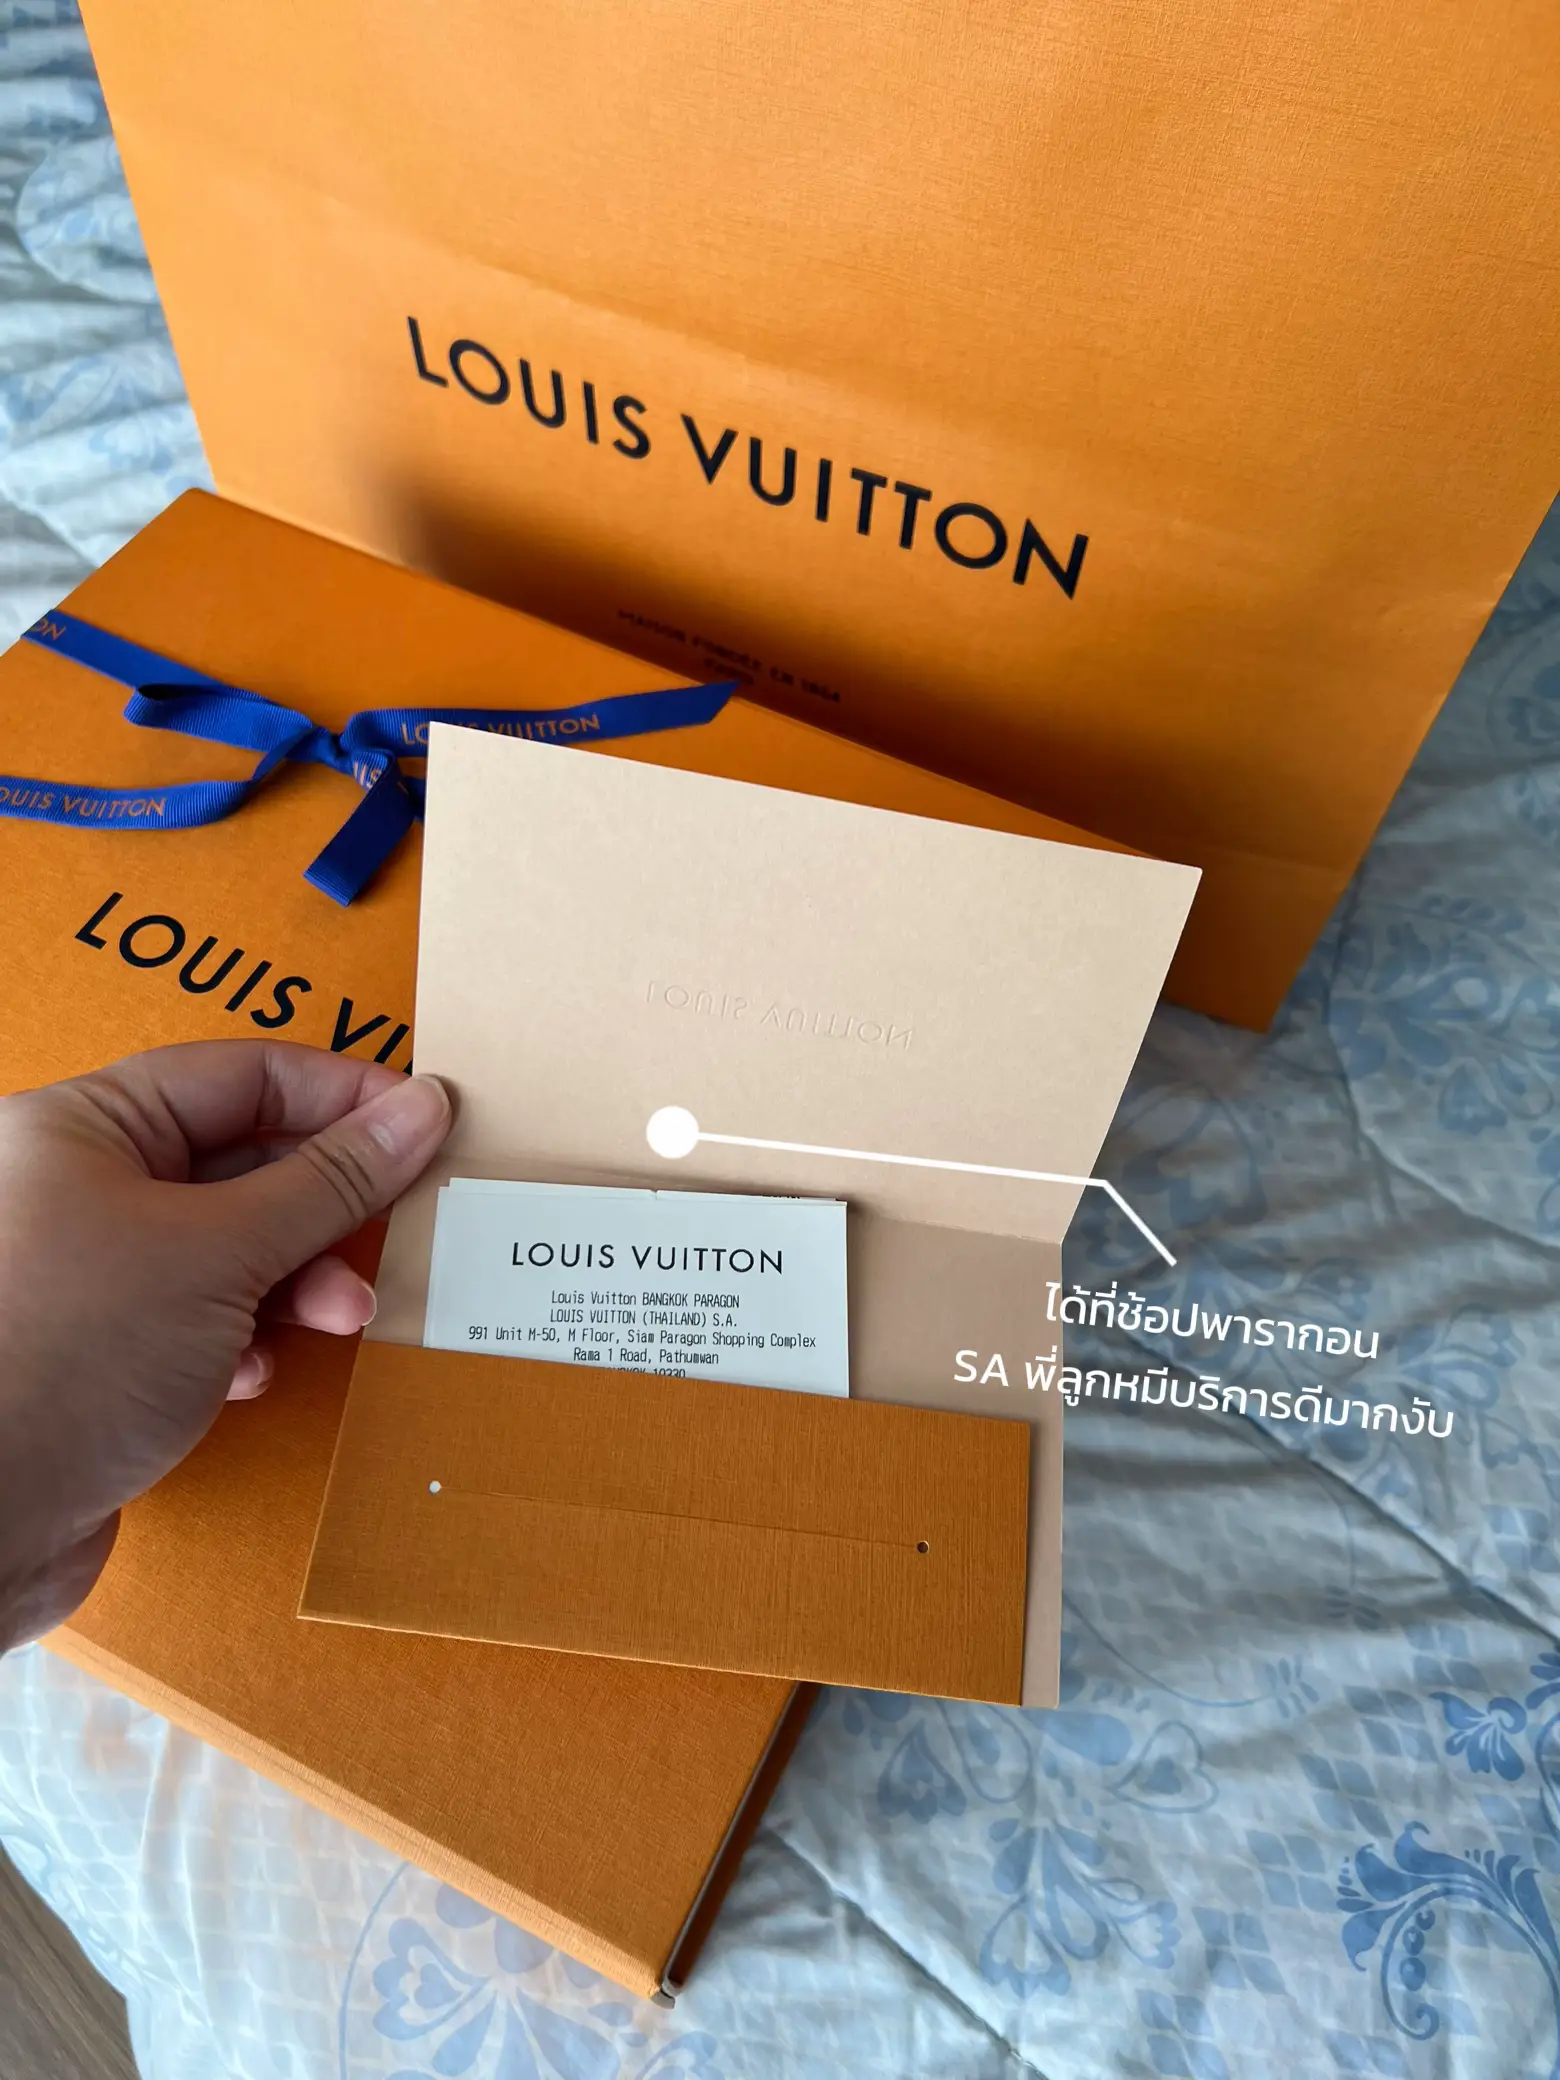 Unboxing mysterious Louis Vuitton birthday gift box